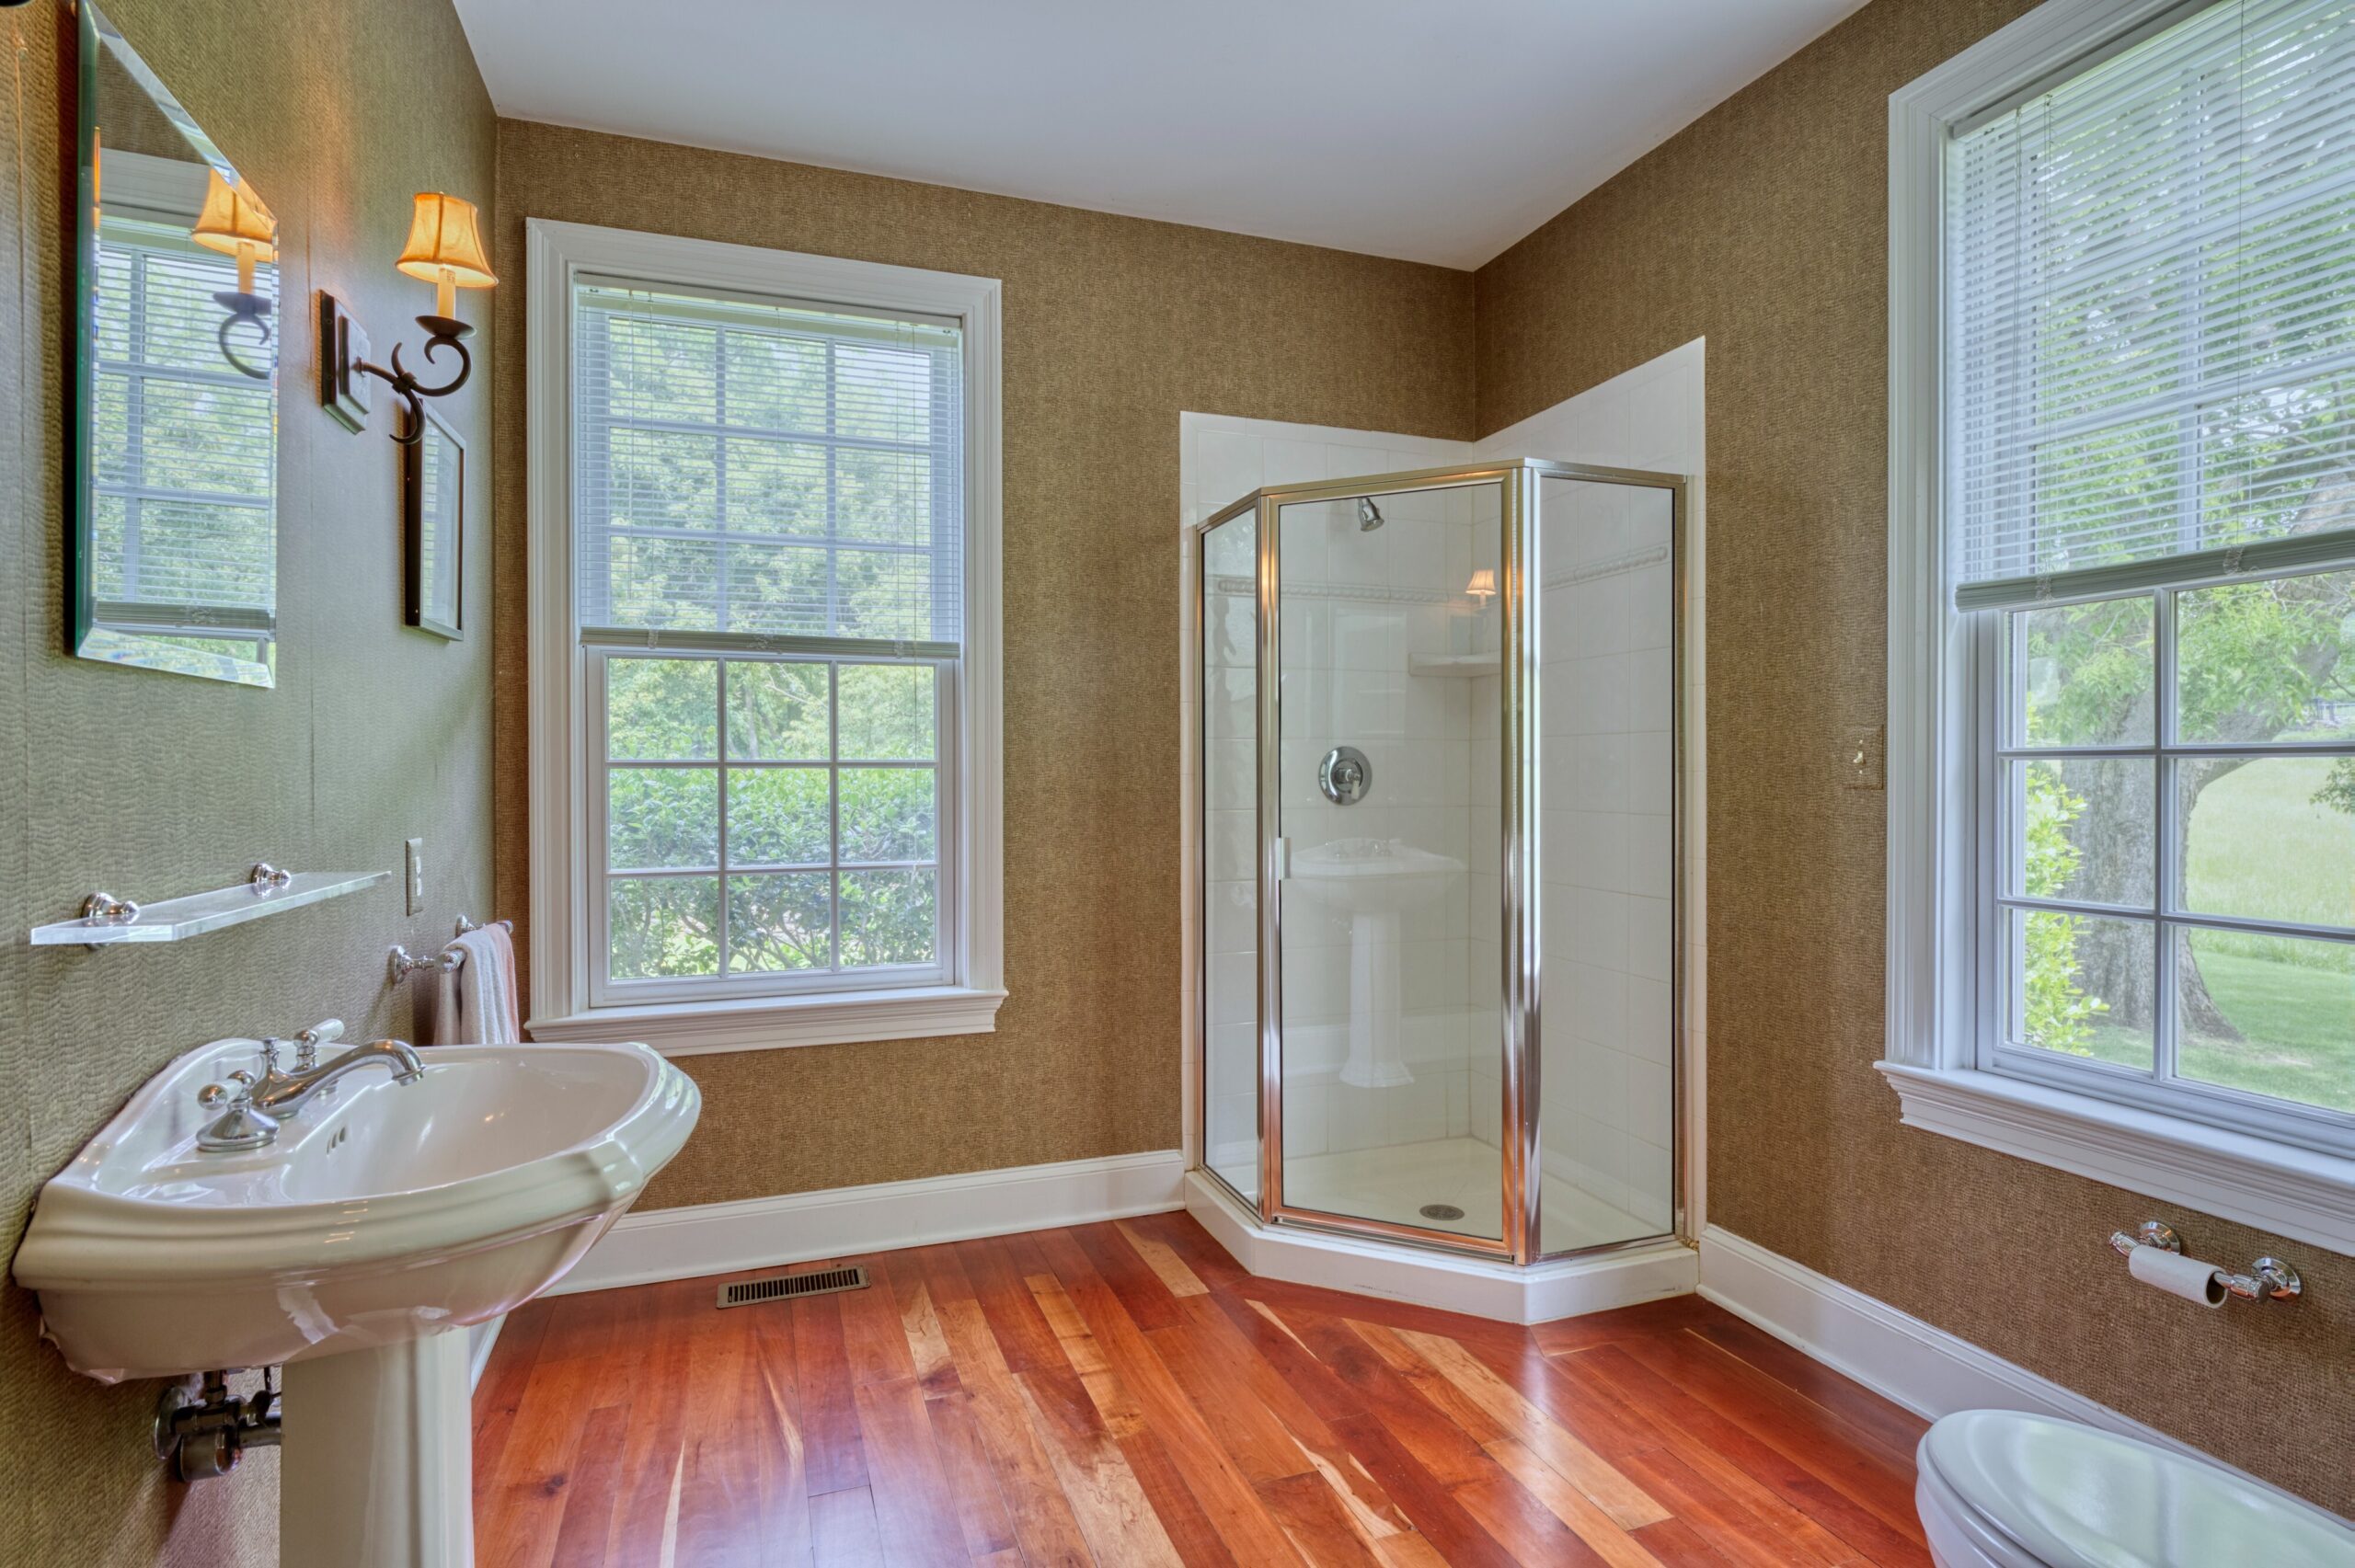 Professional interior photo of 15203 Clover Hill Road - showing a full bathroom with shower built into the corner, tiled, and cherry floors